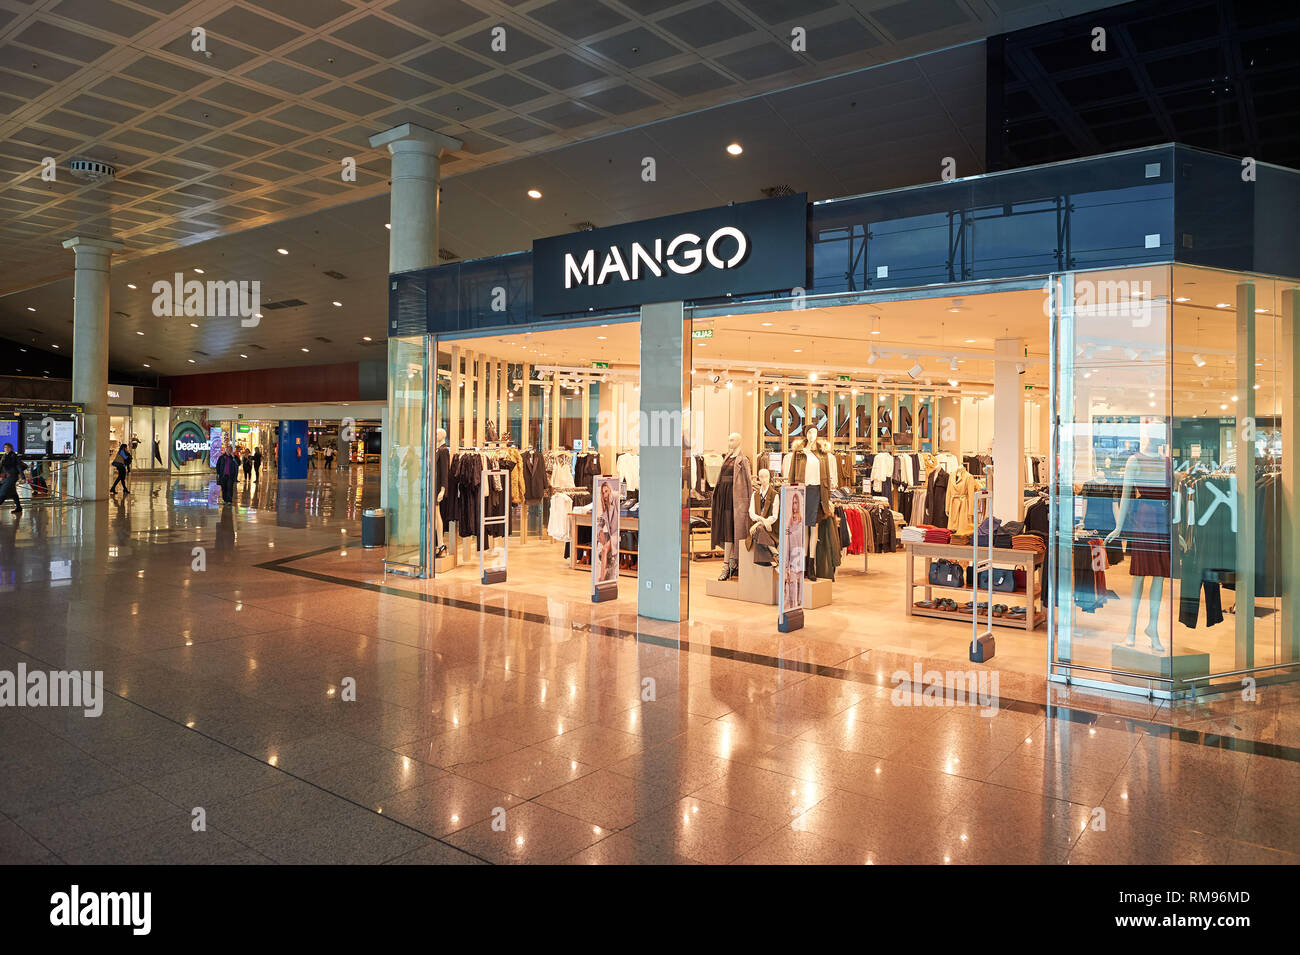 Mango Store At Passeig De Gracia Shopping Street In Barcelona Spain Stock  Photo - Download Image Now - iStock